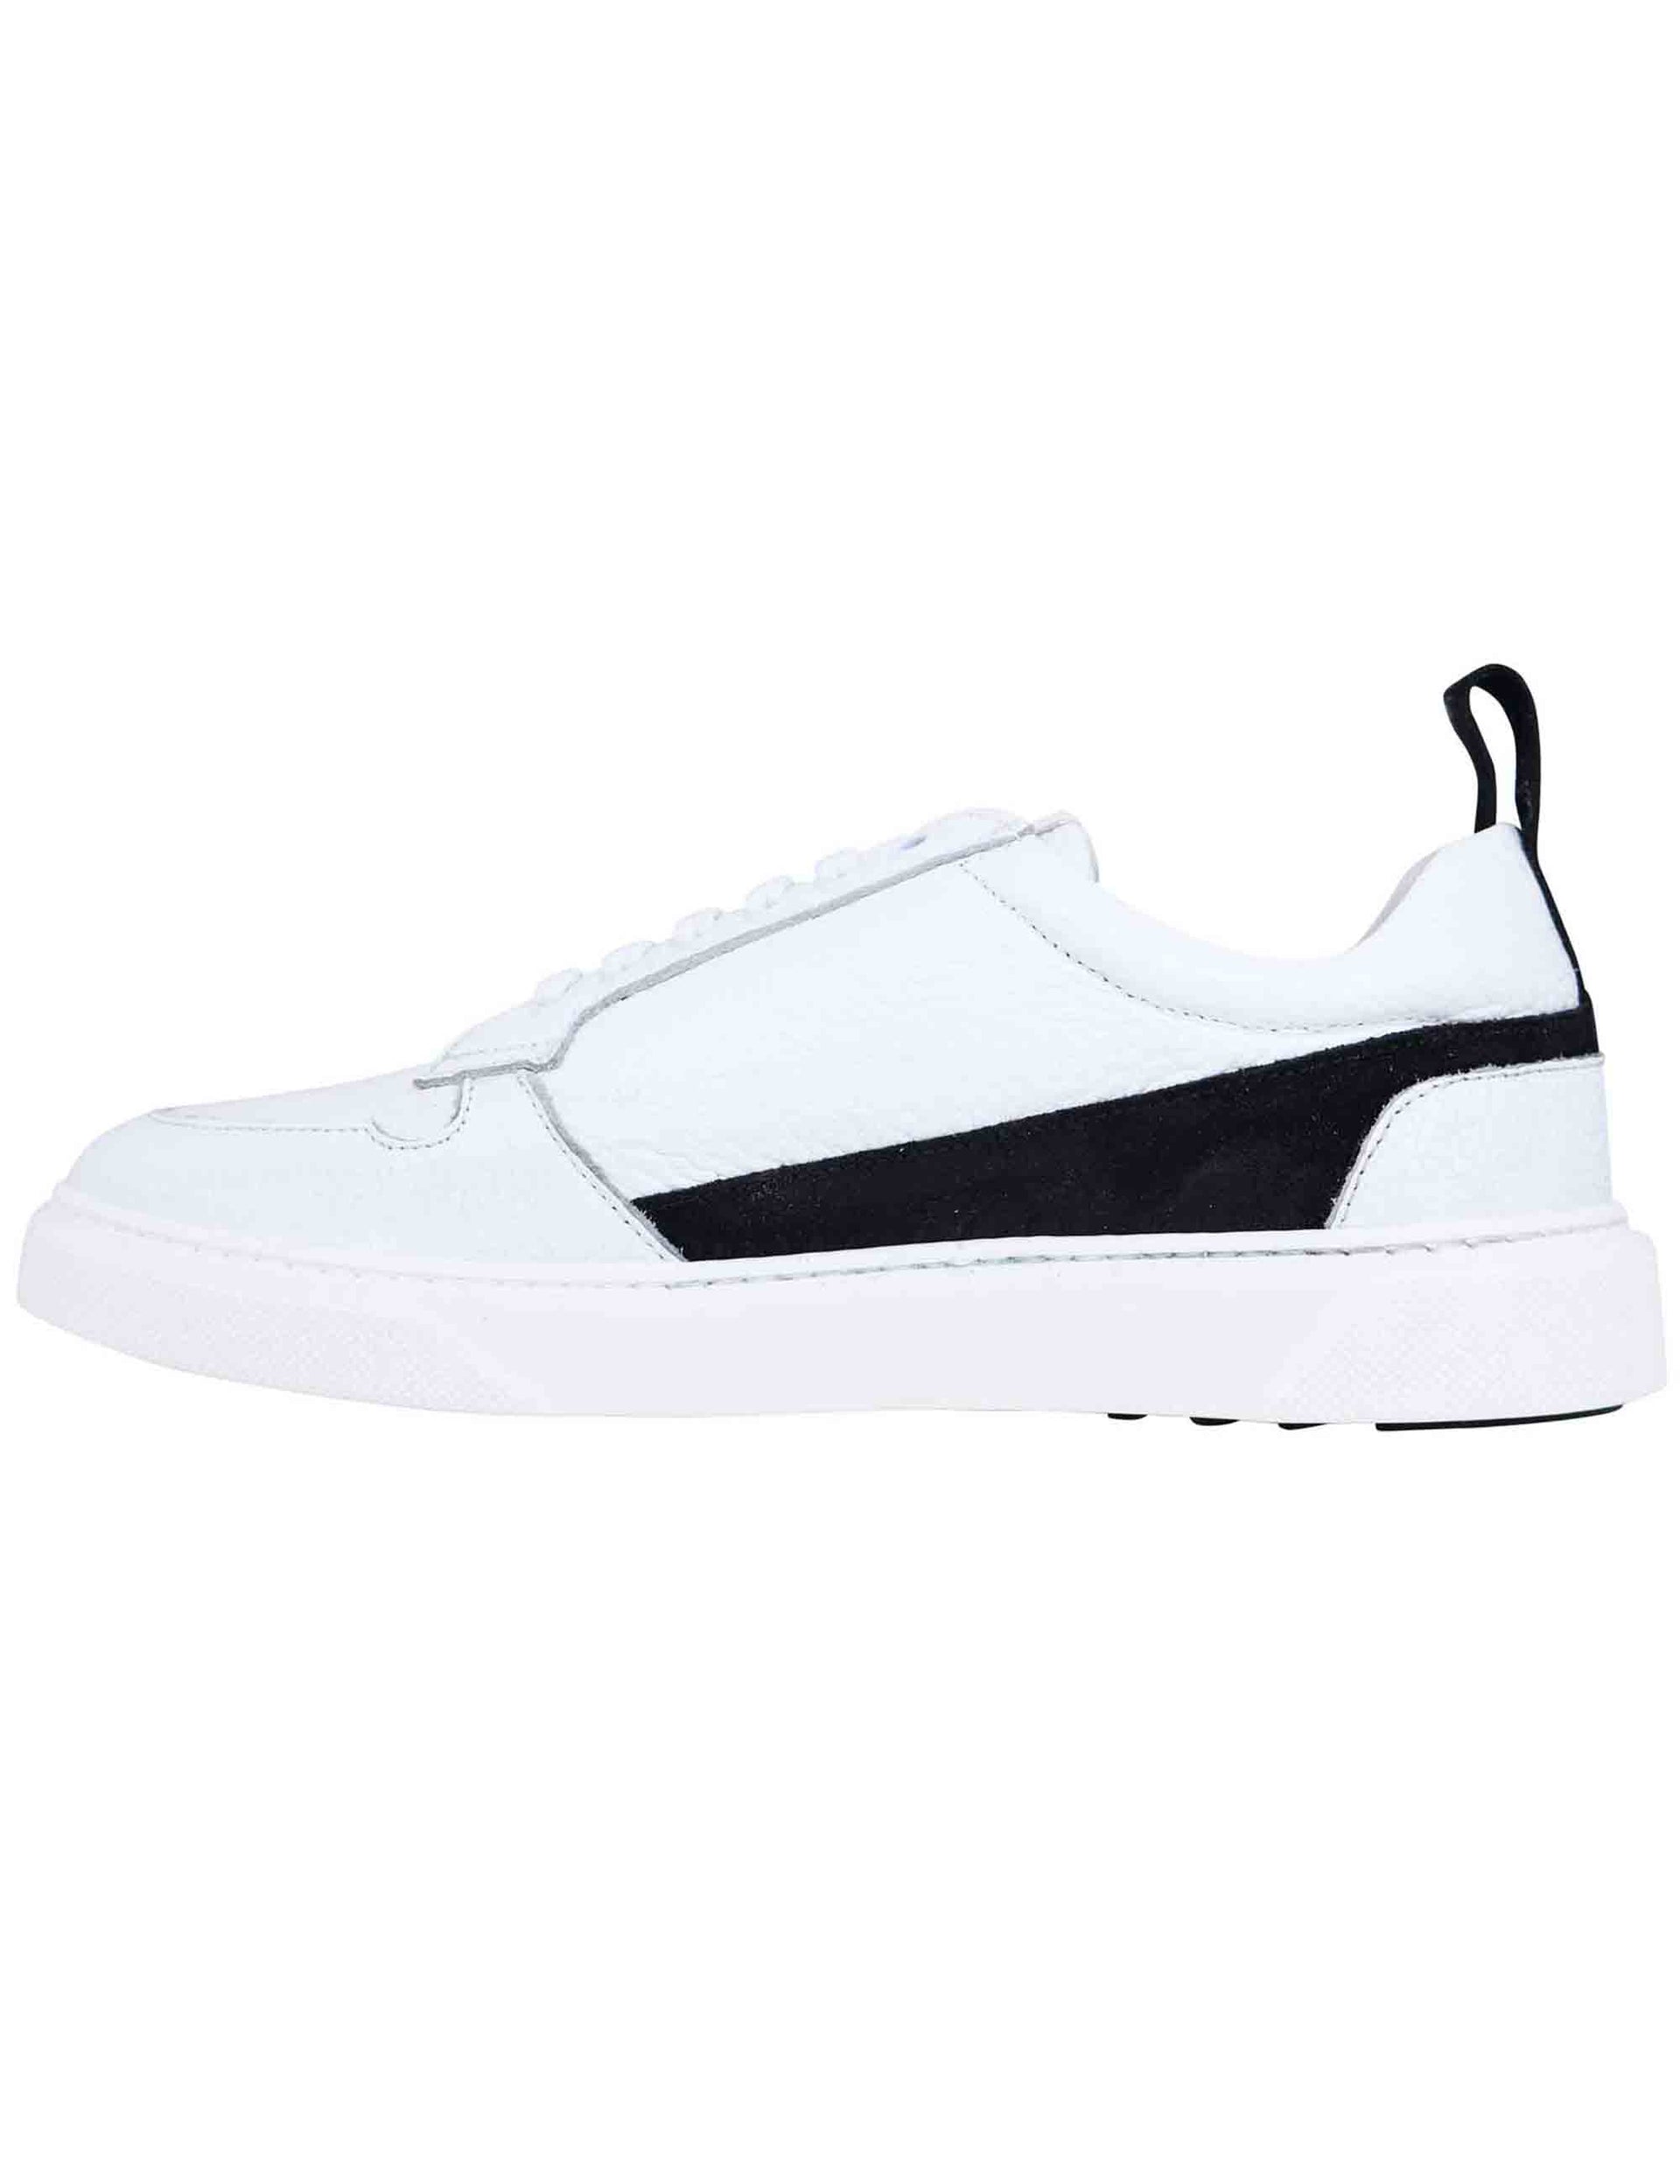 Men's white leather sneakers